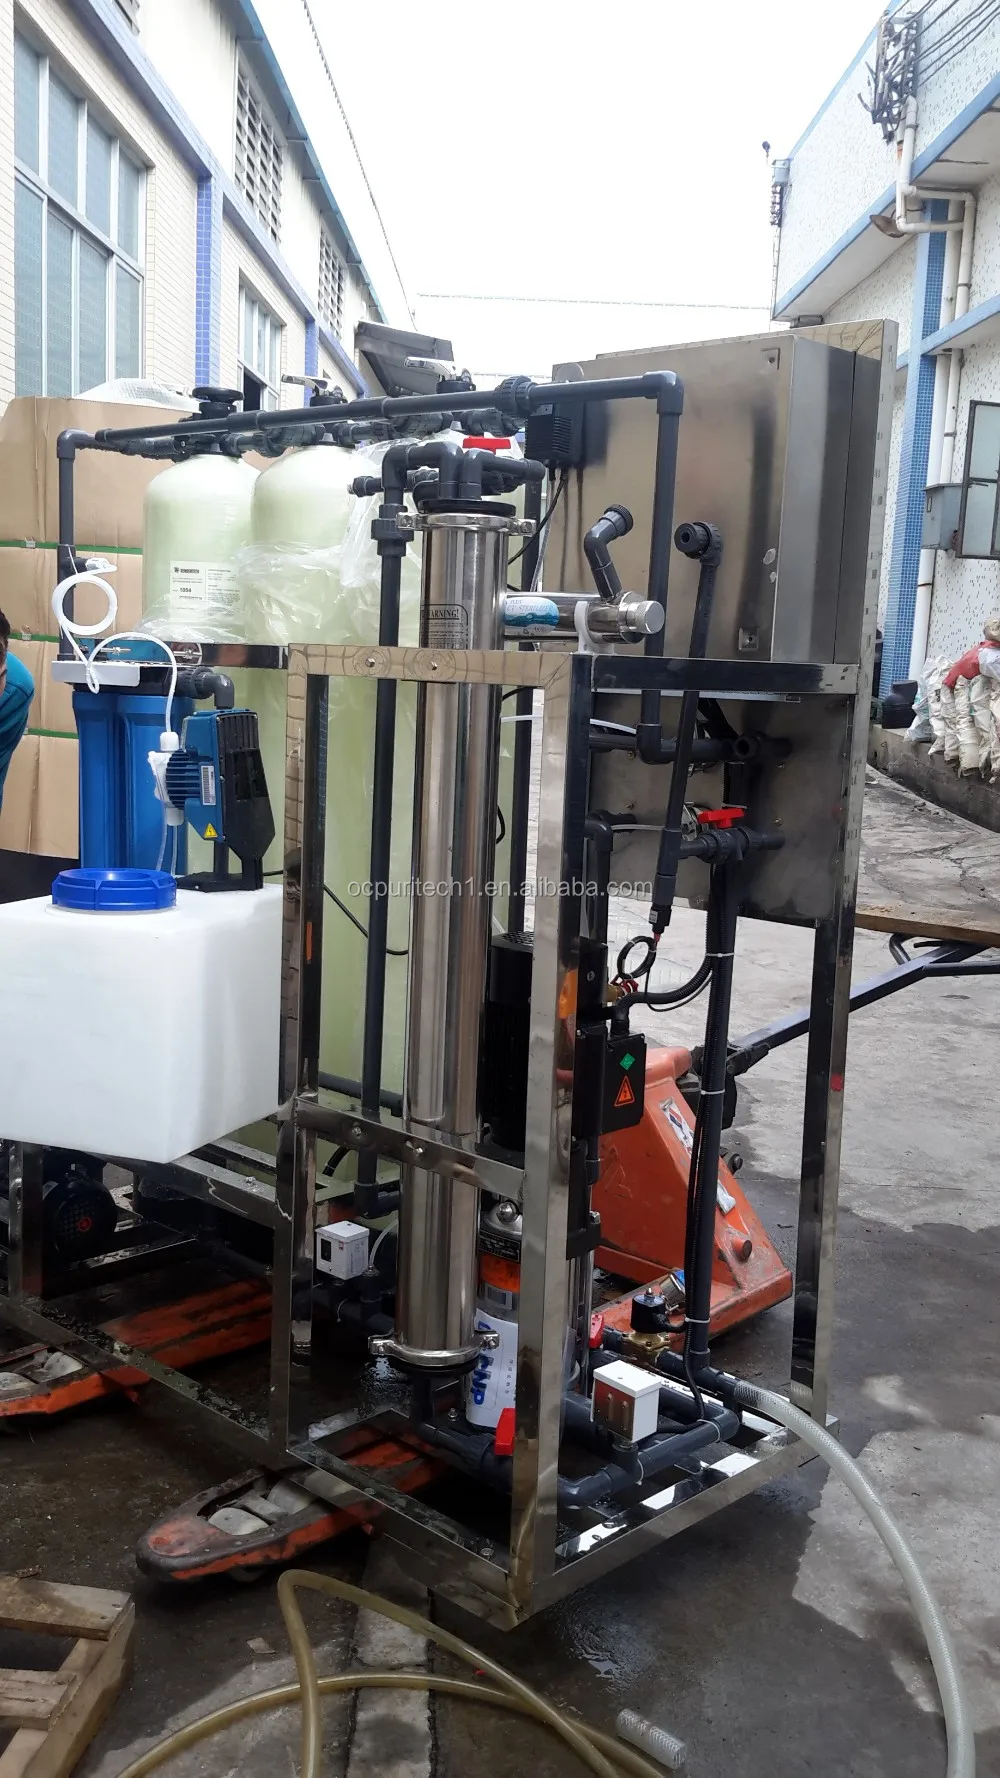 Low price 250lph (1500gpd) reverse osmosis(ro) water purification system for BOREHOLE salty water desalination